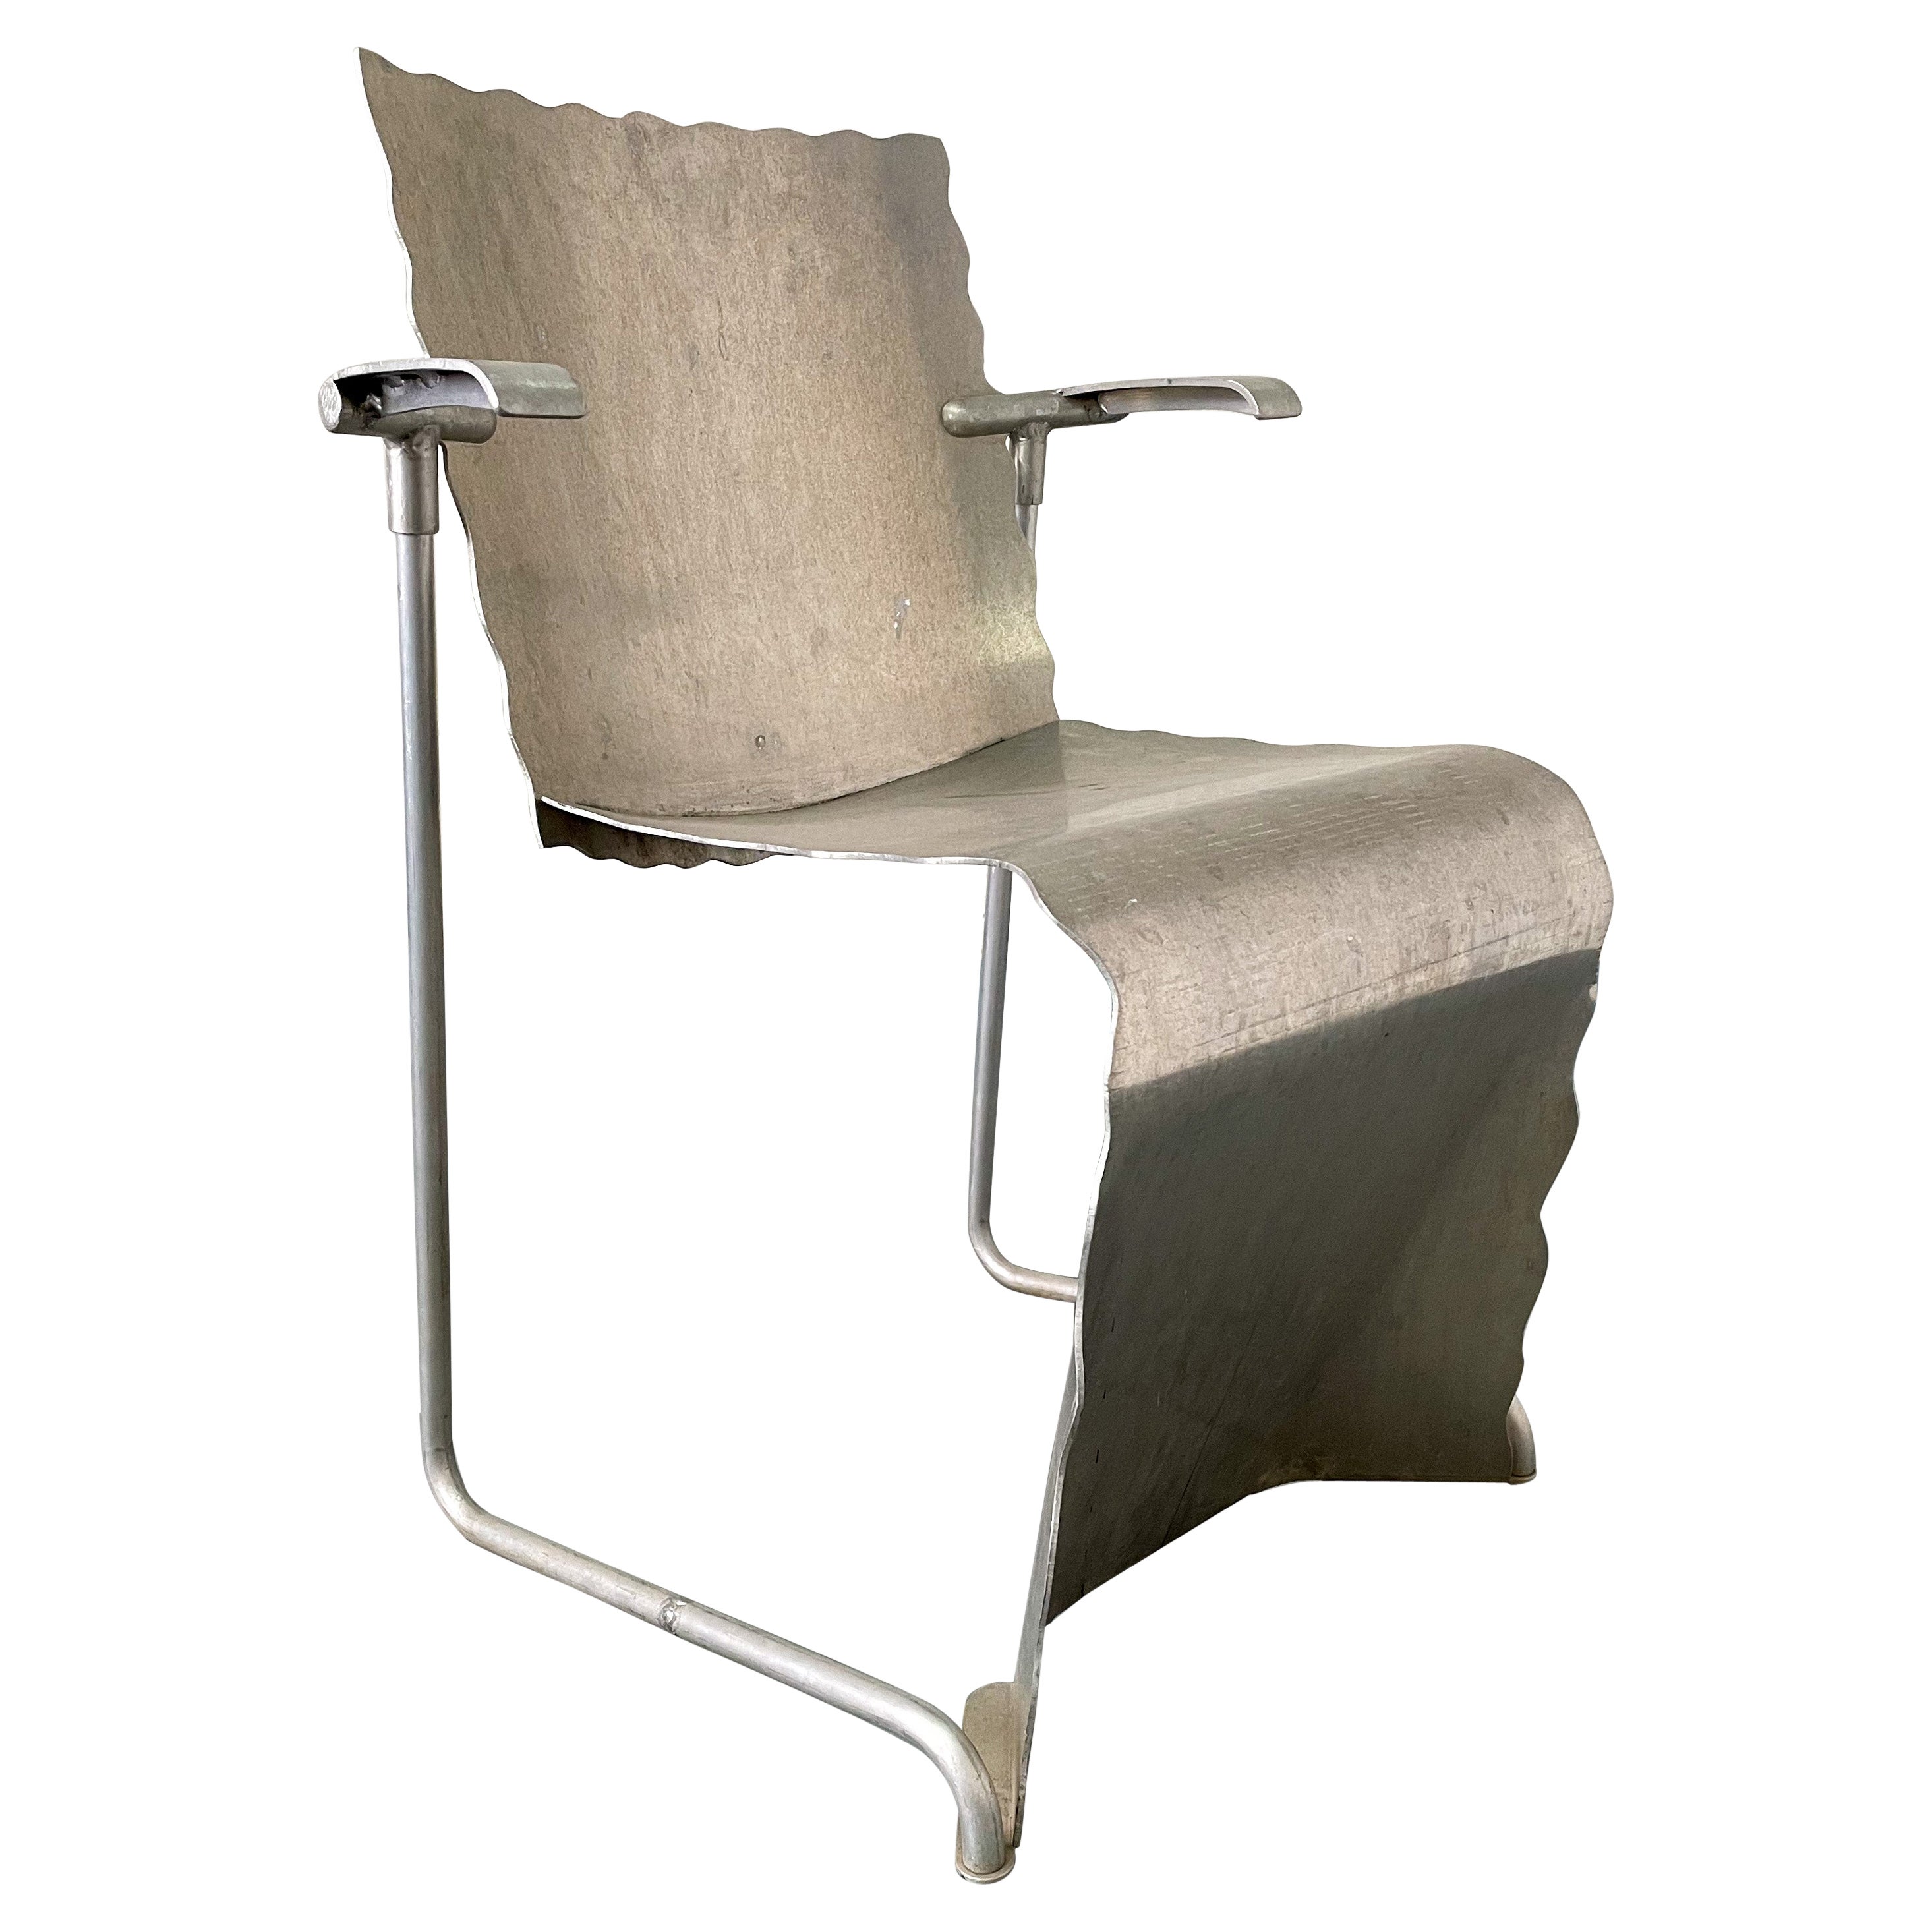 Richard Schultz Prototype Aluminum Stacking Chair #2 For Sale